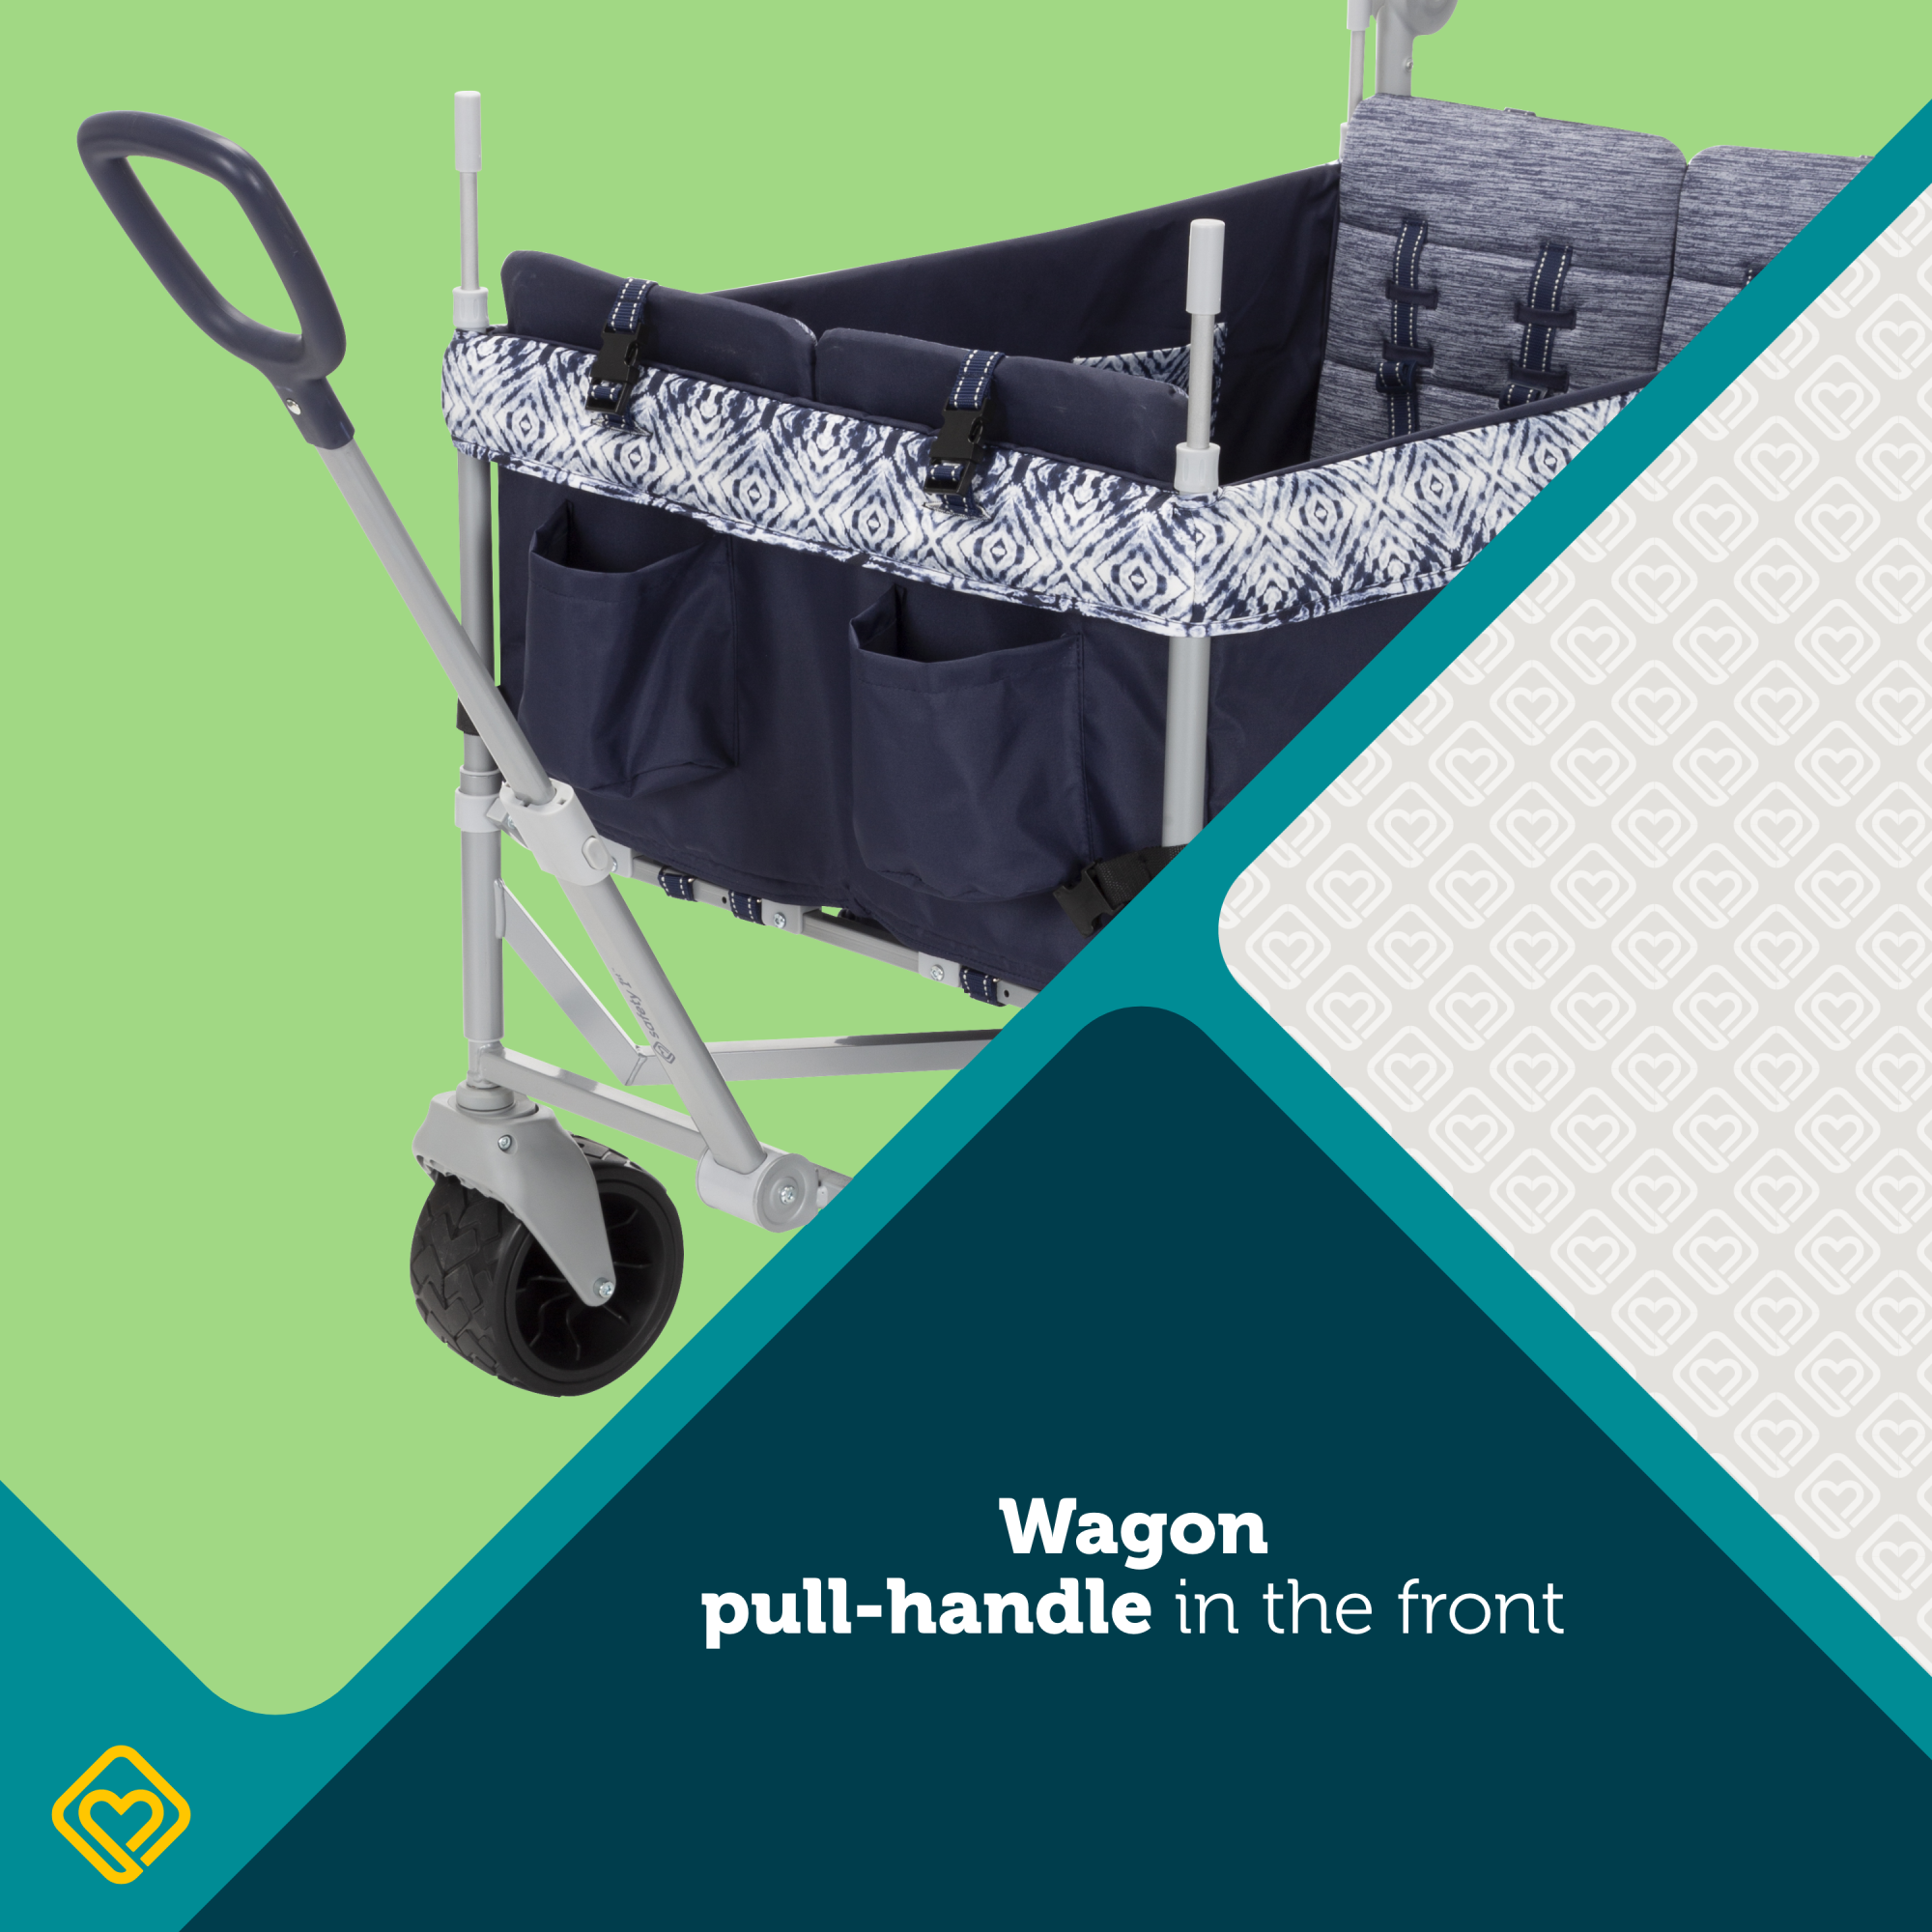 Summit Quad Wagon Stroller - wagon pull-handle in the front